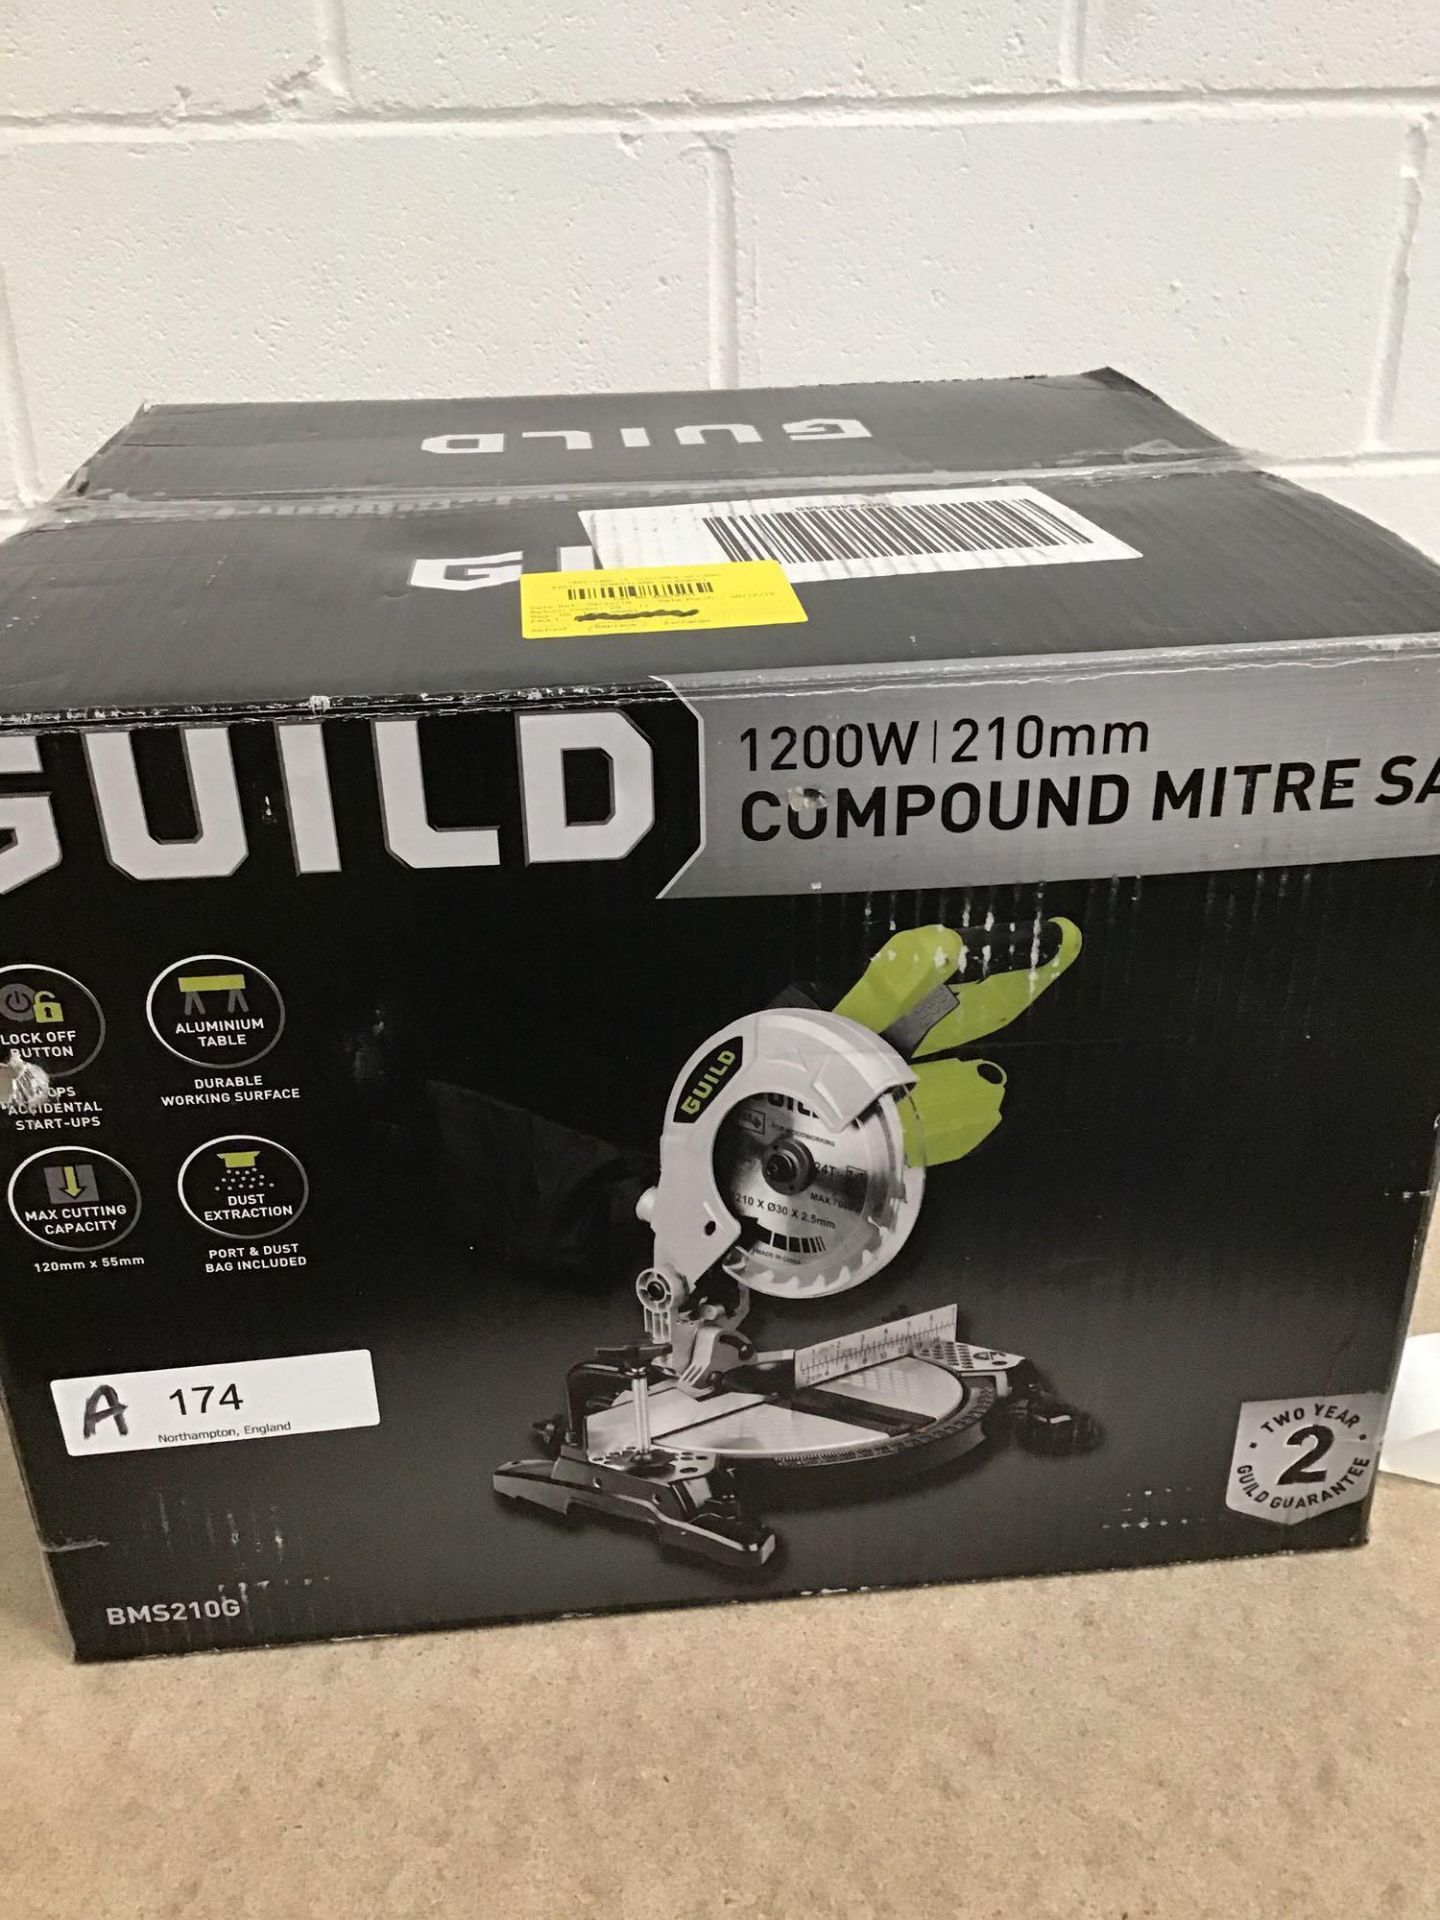 Guild 210mm Compound Mitre Saw - 1200W 459/8707 £70.00 RRP - Image 2 of 5